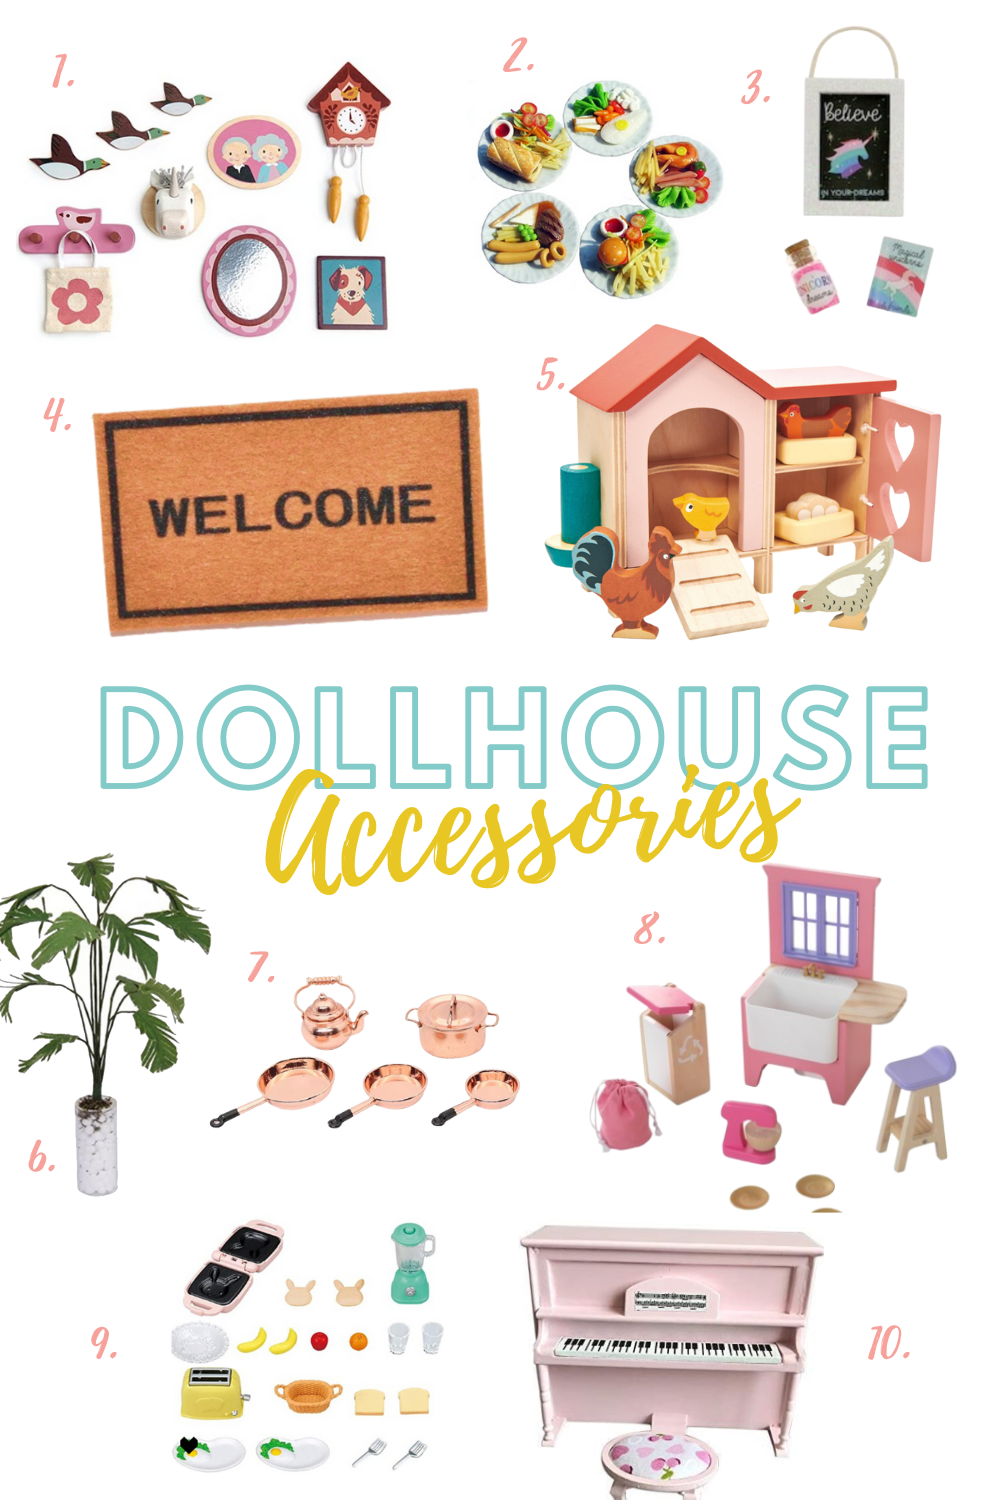 Add accessories to a DIY dollhouse for extra fun!